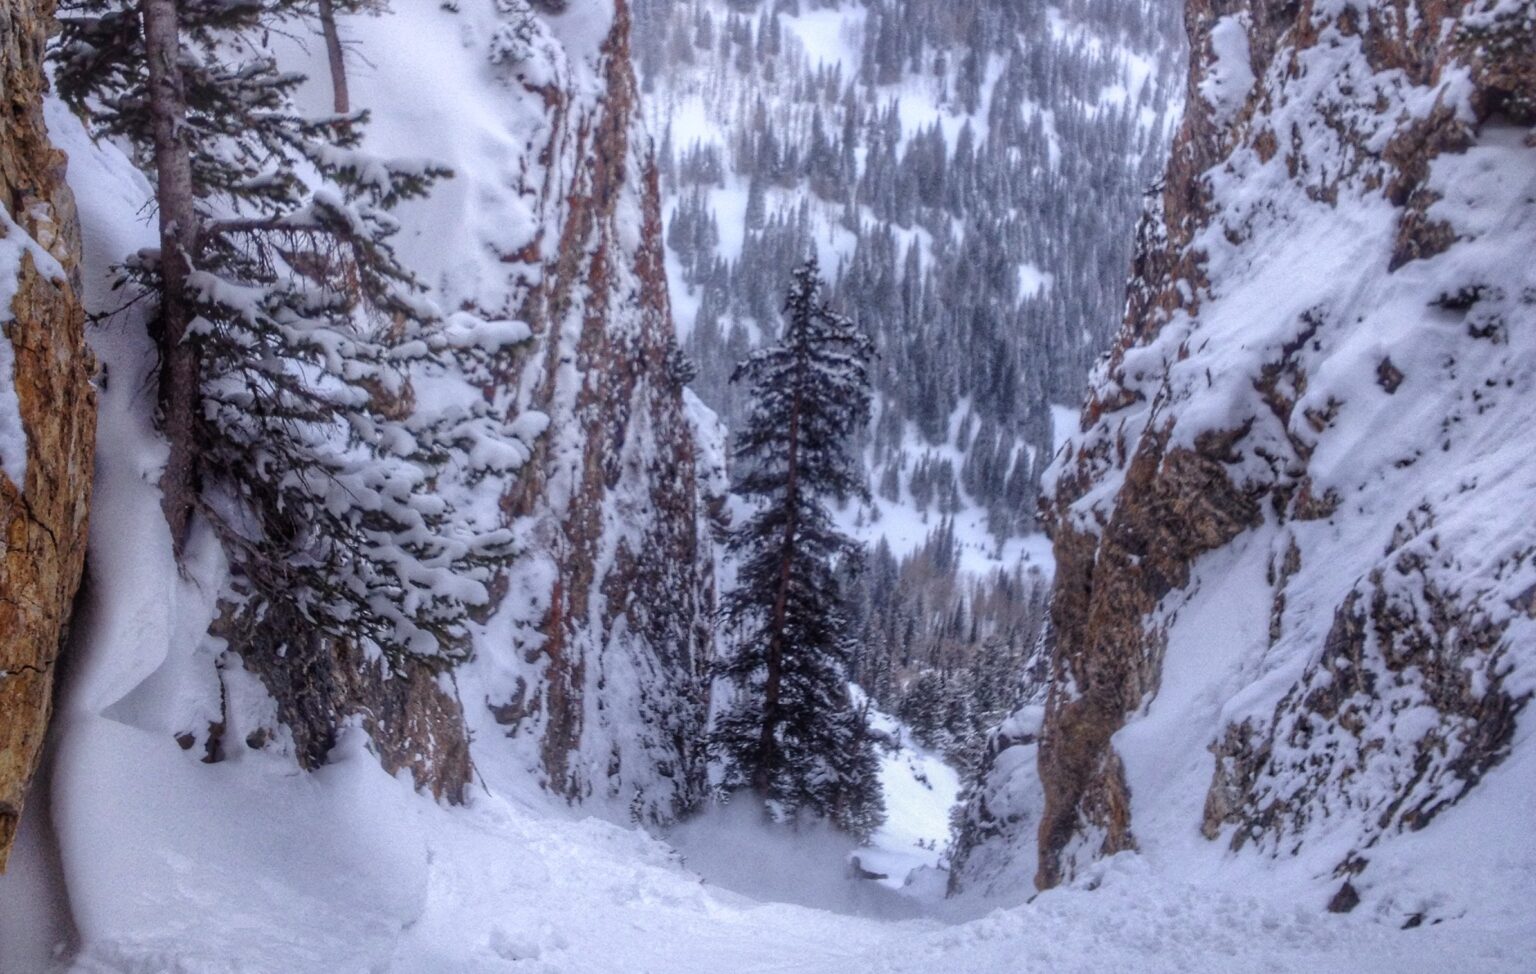 Snowboarding down Benson and Hedges in the Wasatch Backcountry of Utah